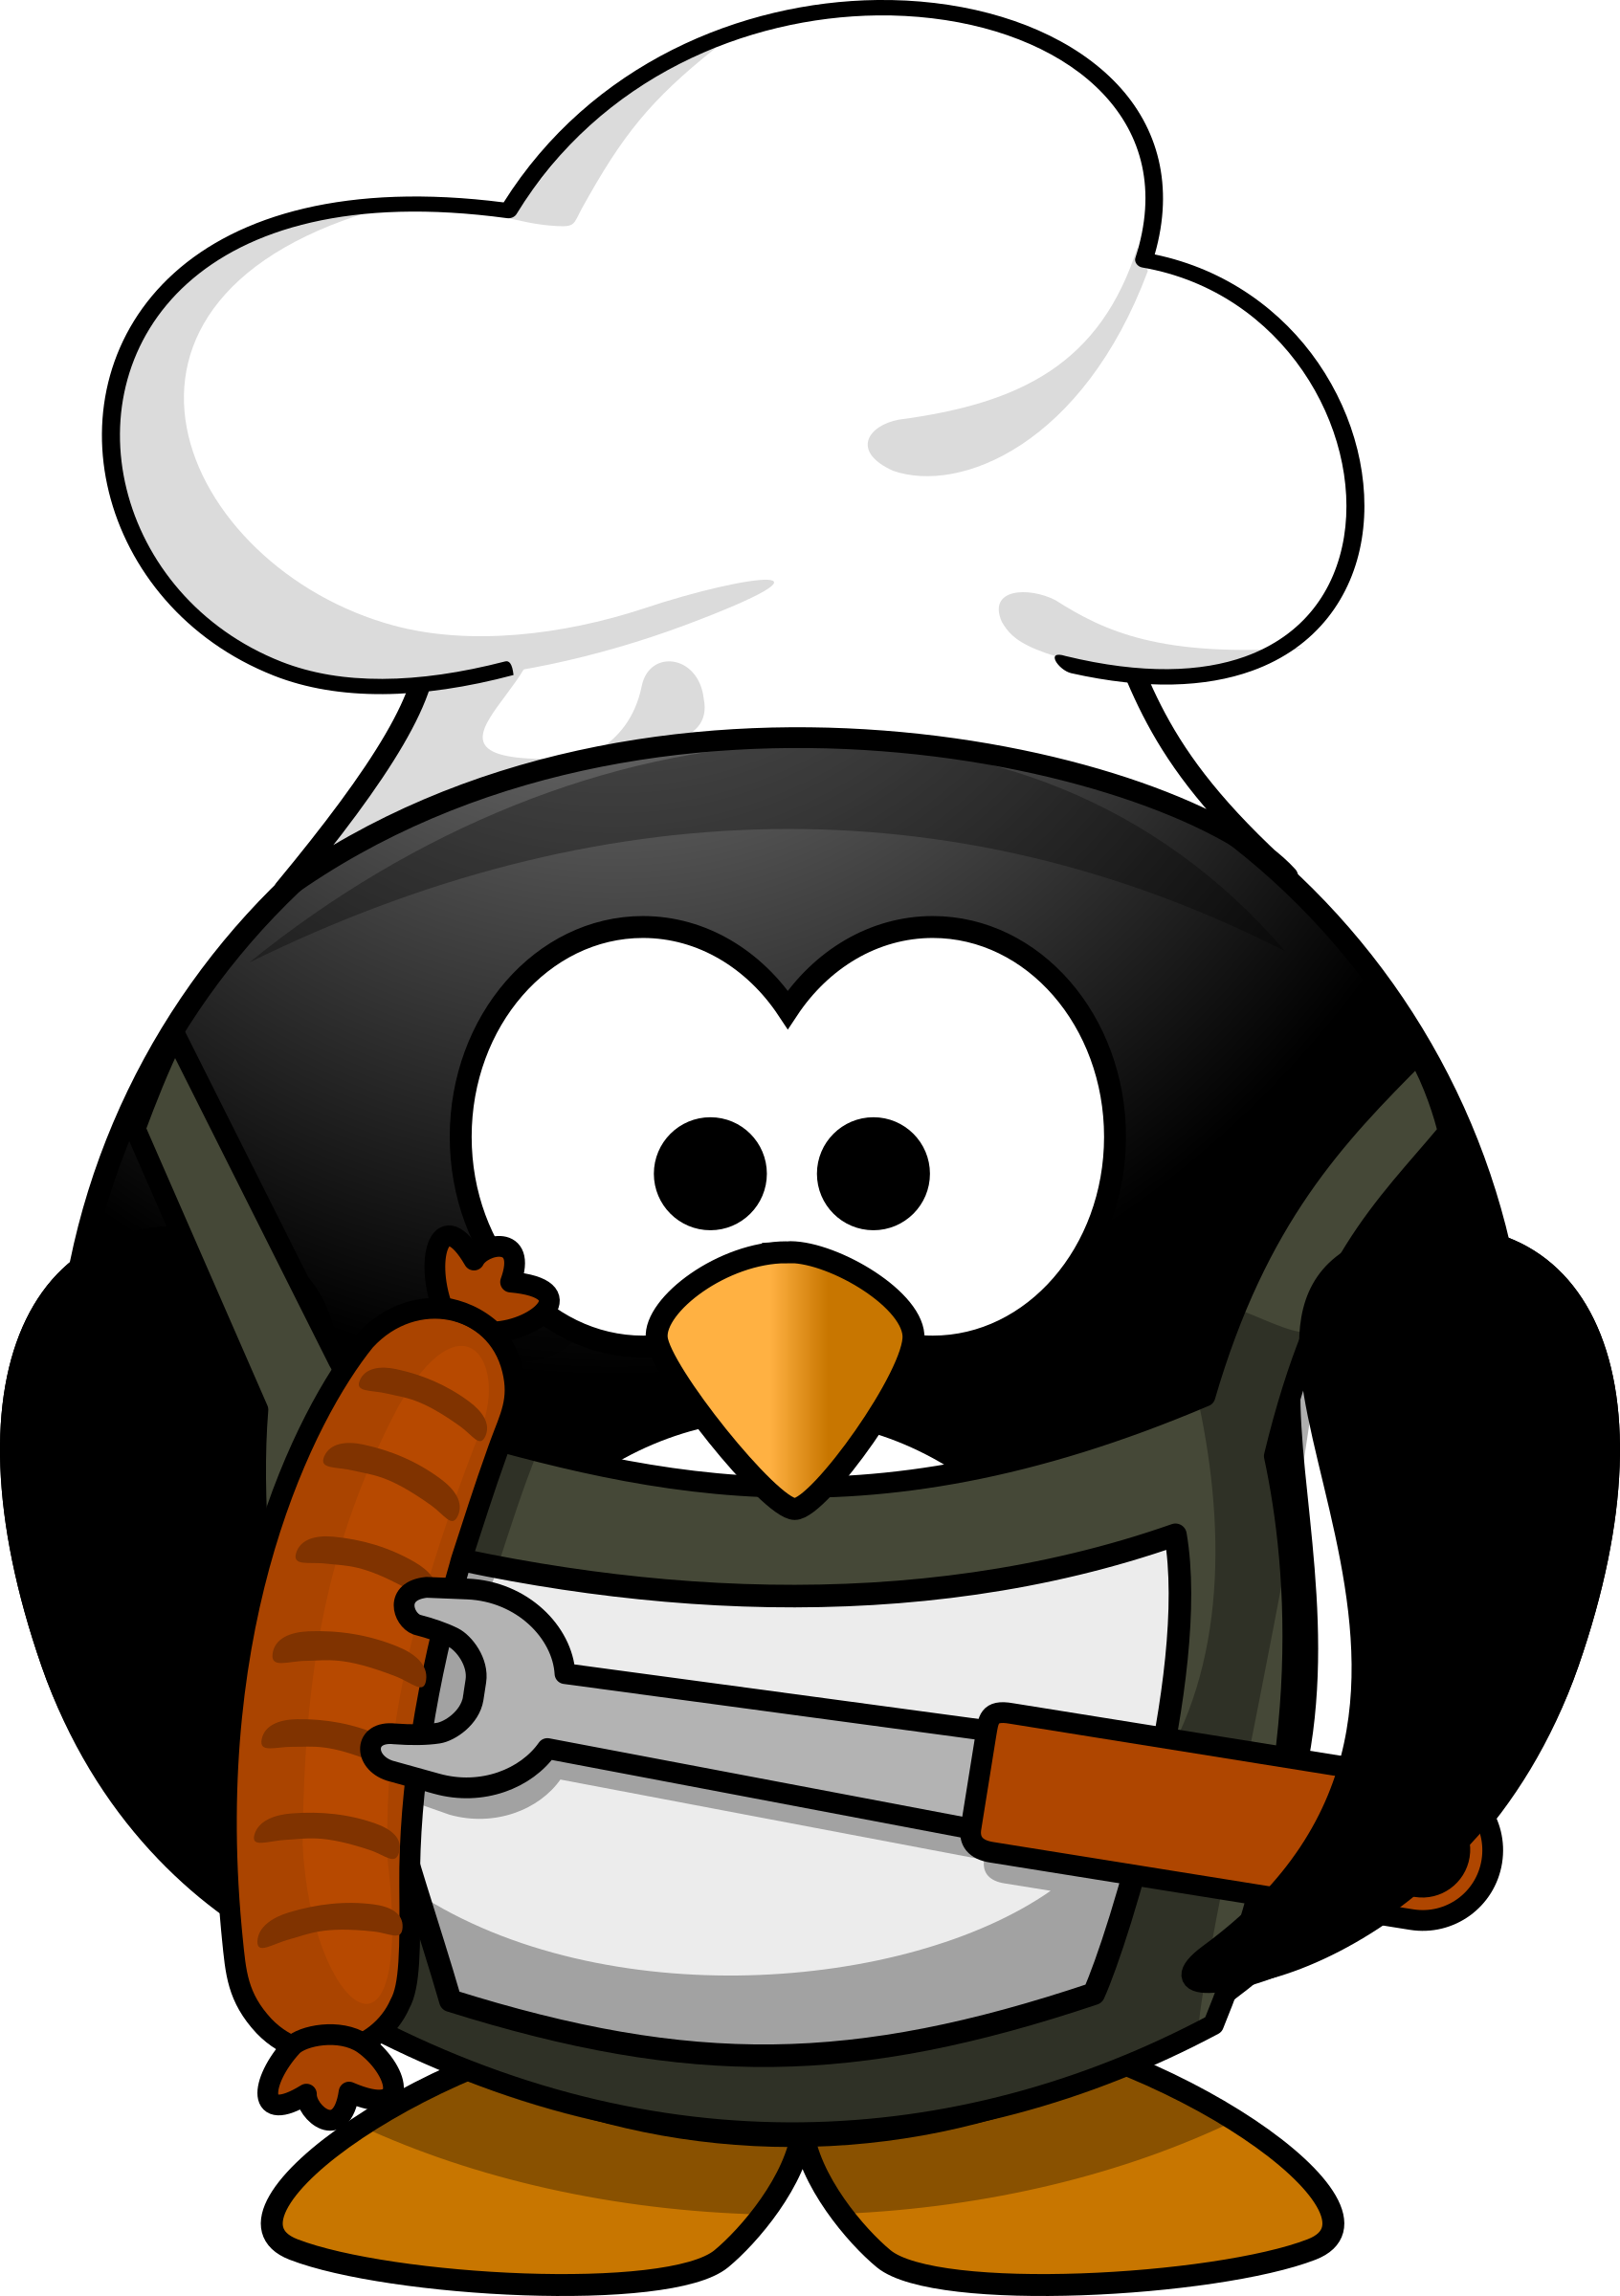 Grill clipart icon. Grilling penguin big image